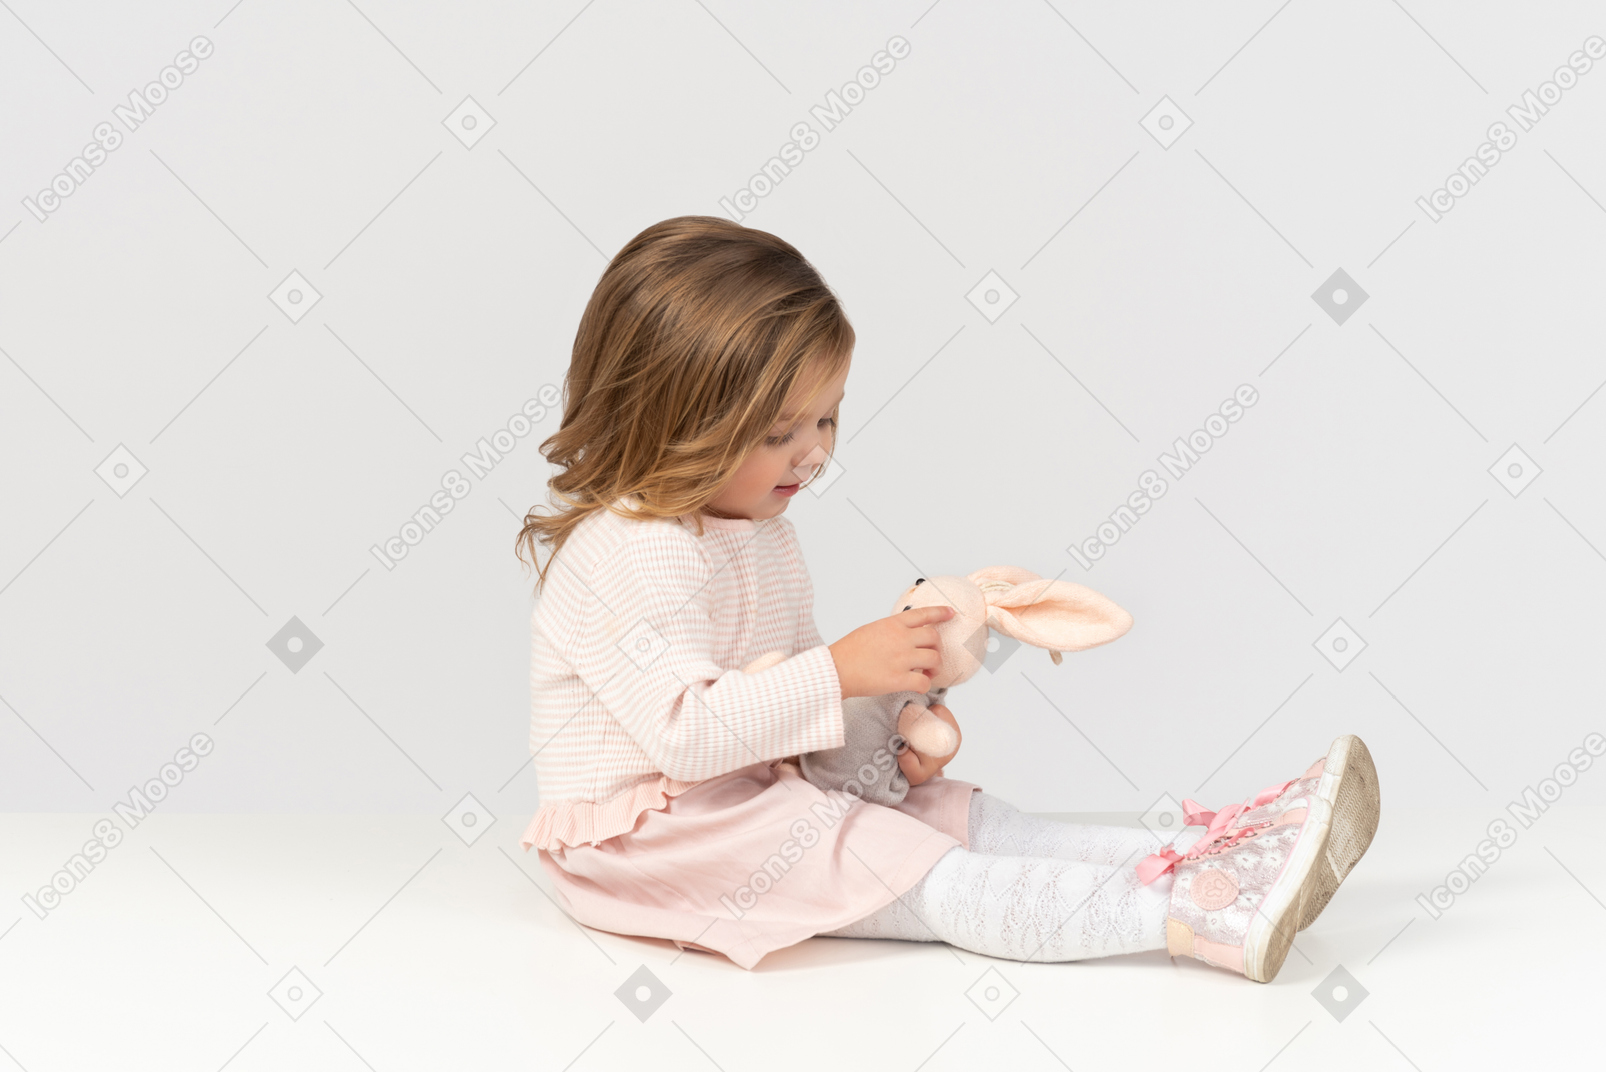 Cute little girl playing with a bunny toy